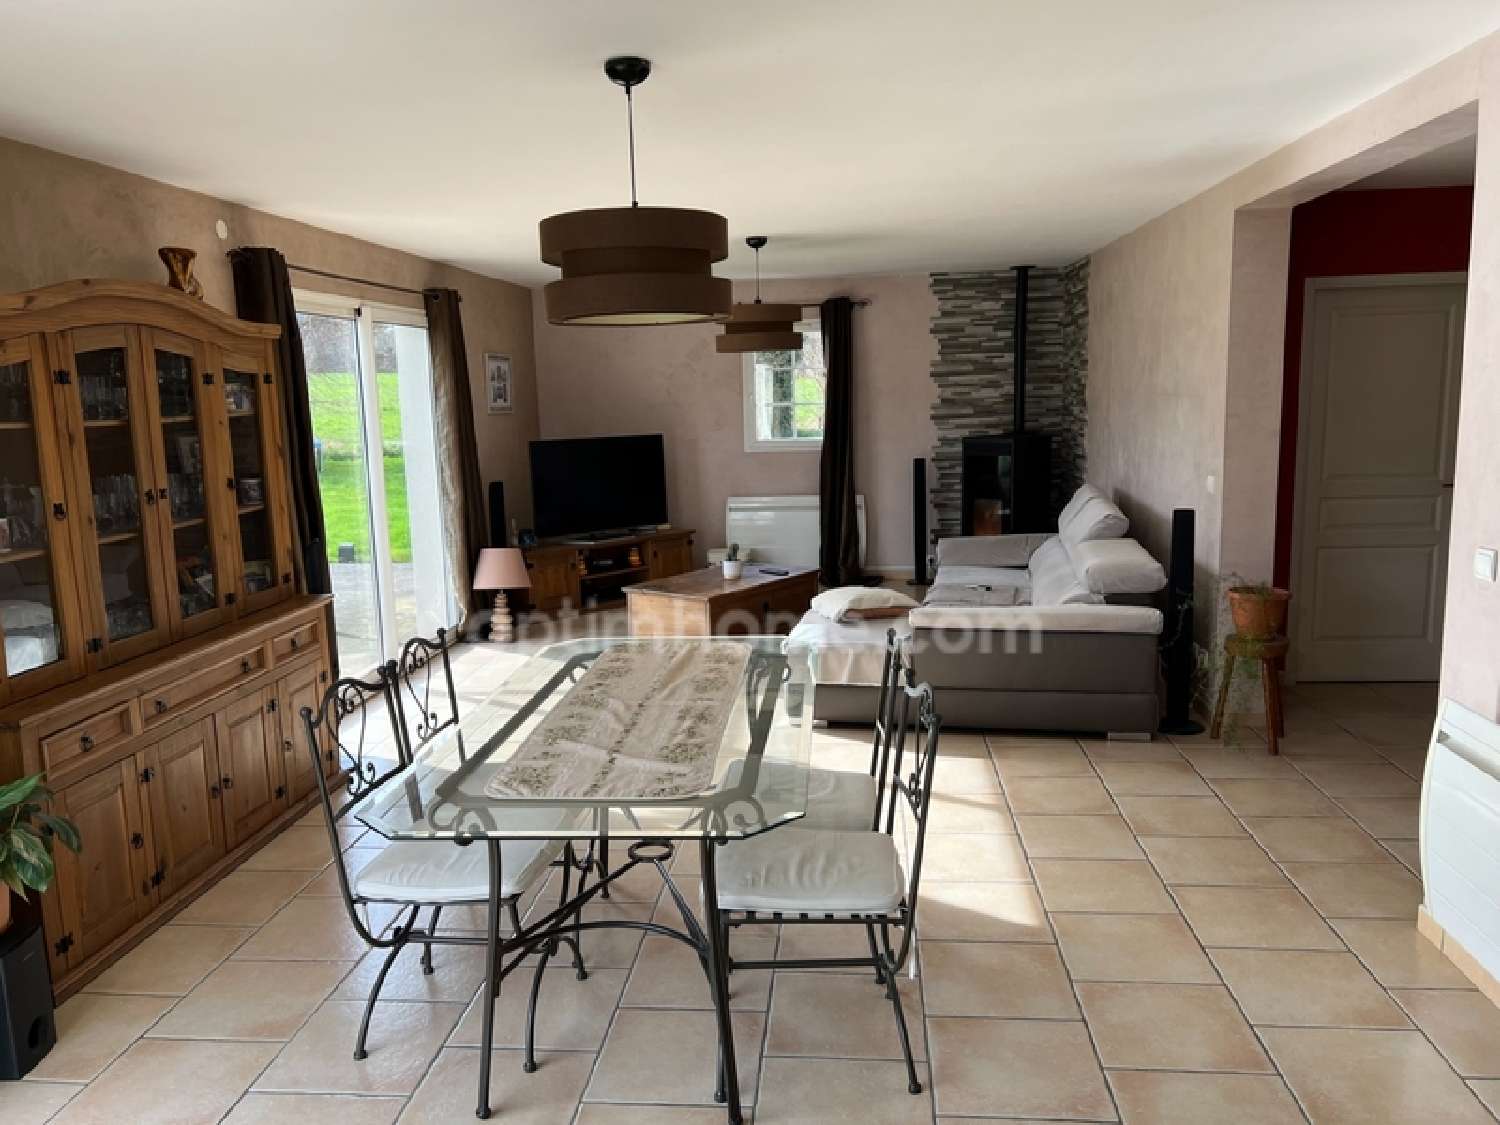  for sale house Lisieux Calvados 8